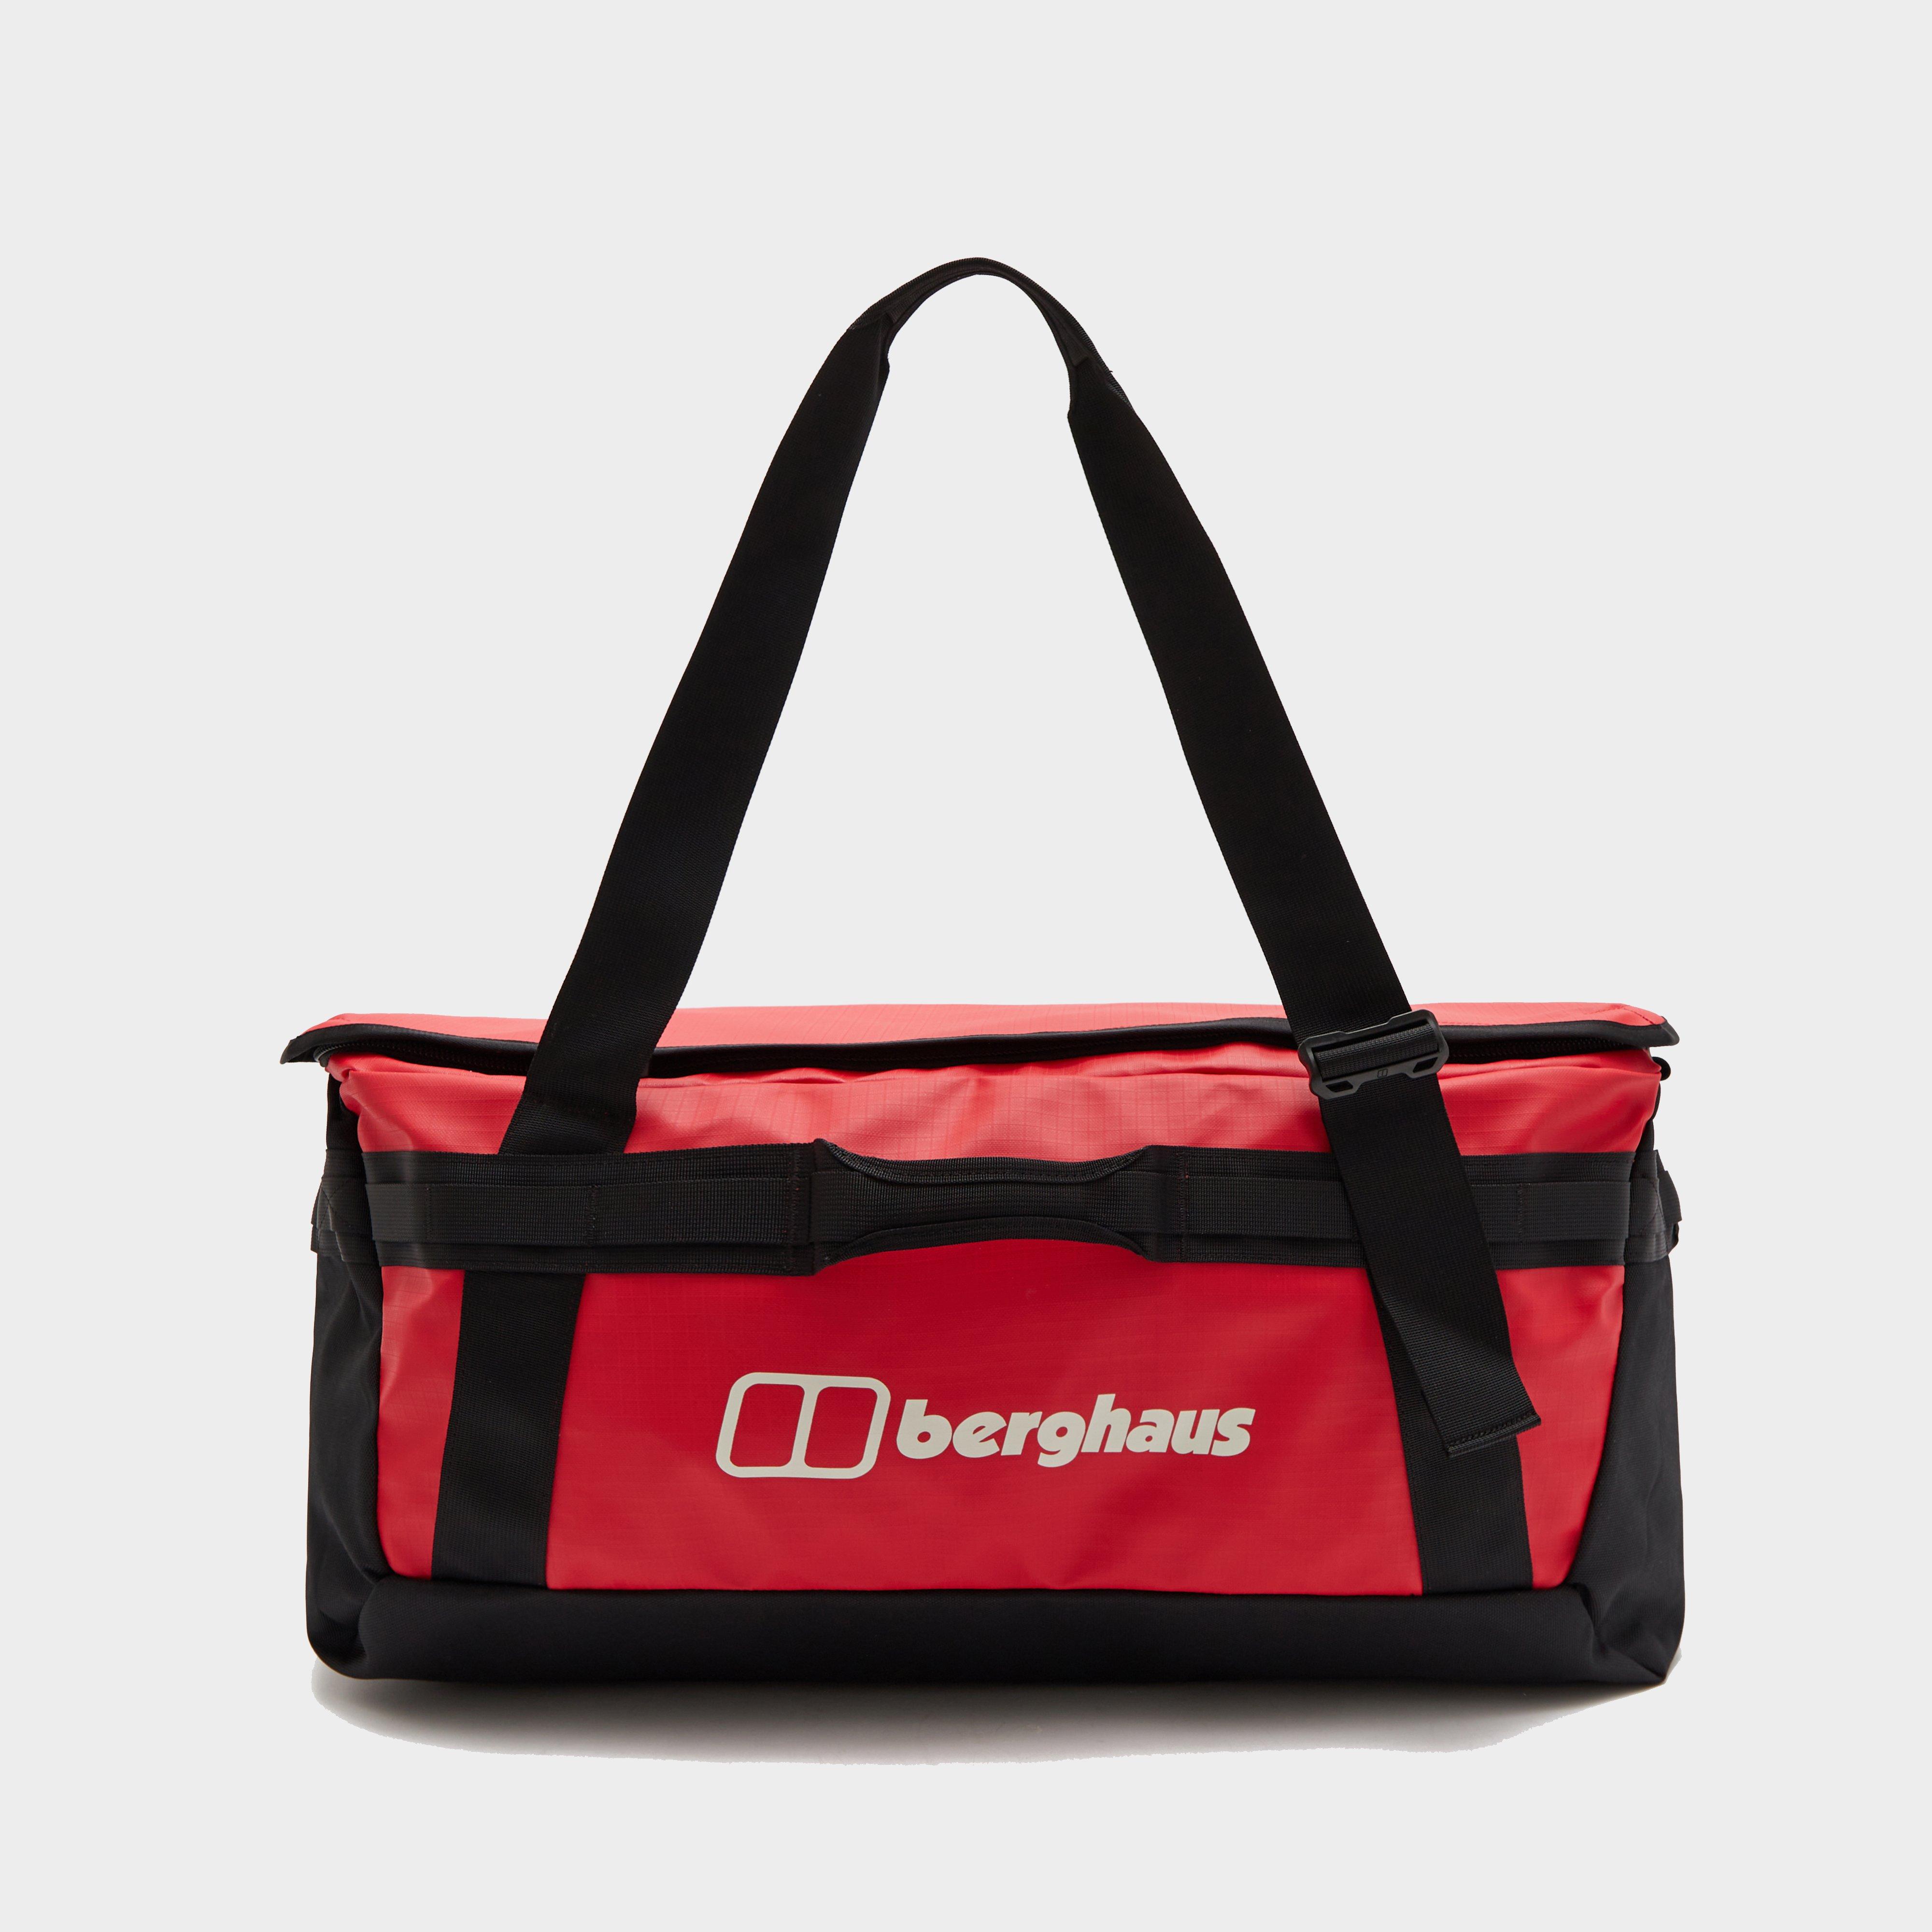 Berghaus Berghaus 80L Holdall - Red, RED